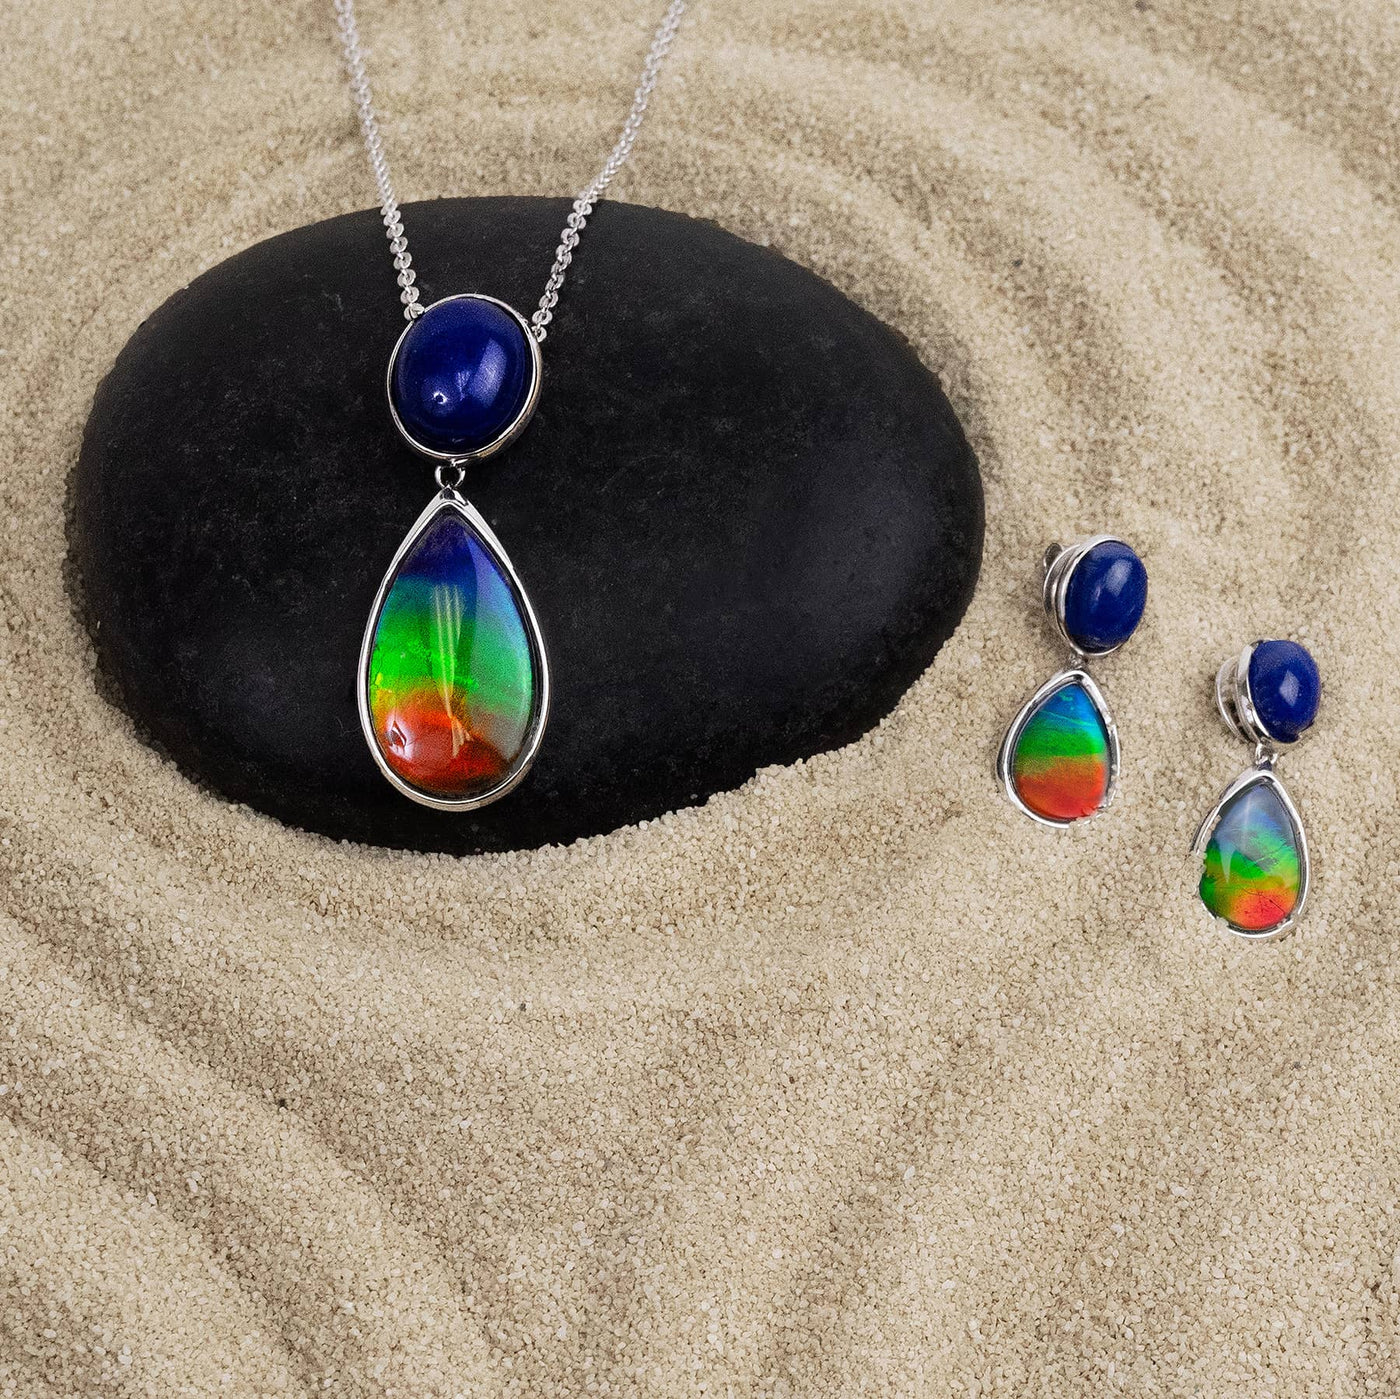 Harmony Ammolite Earrings in Sterling Silver with Lapis